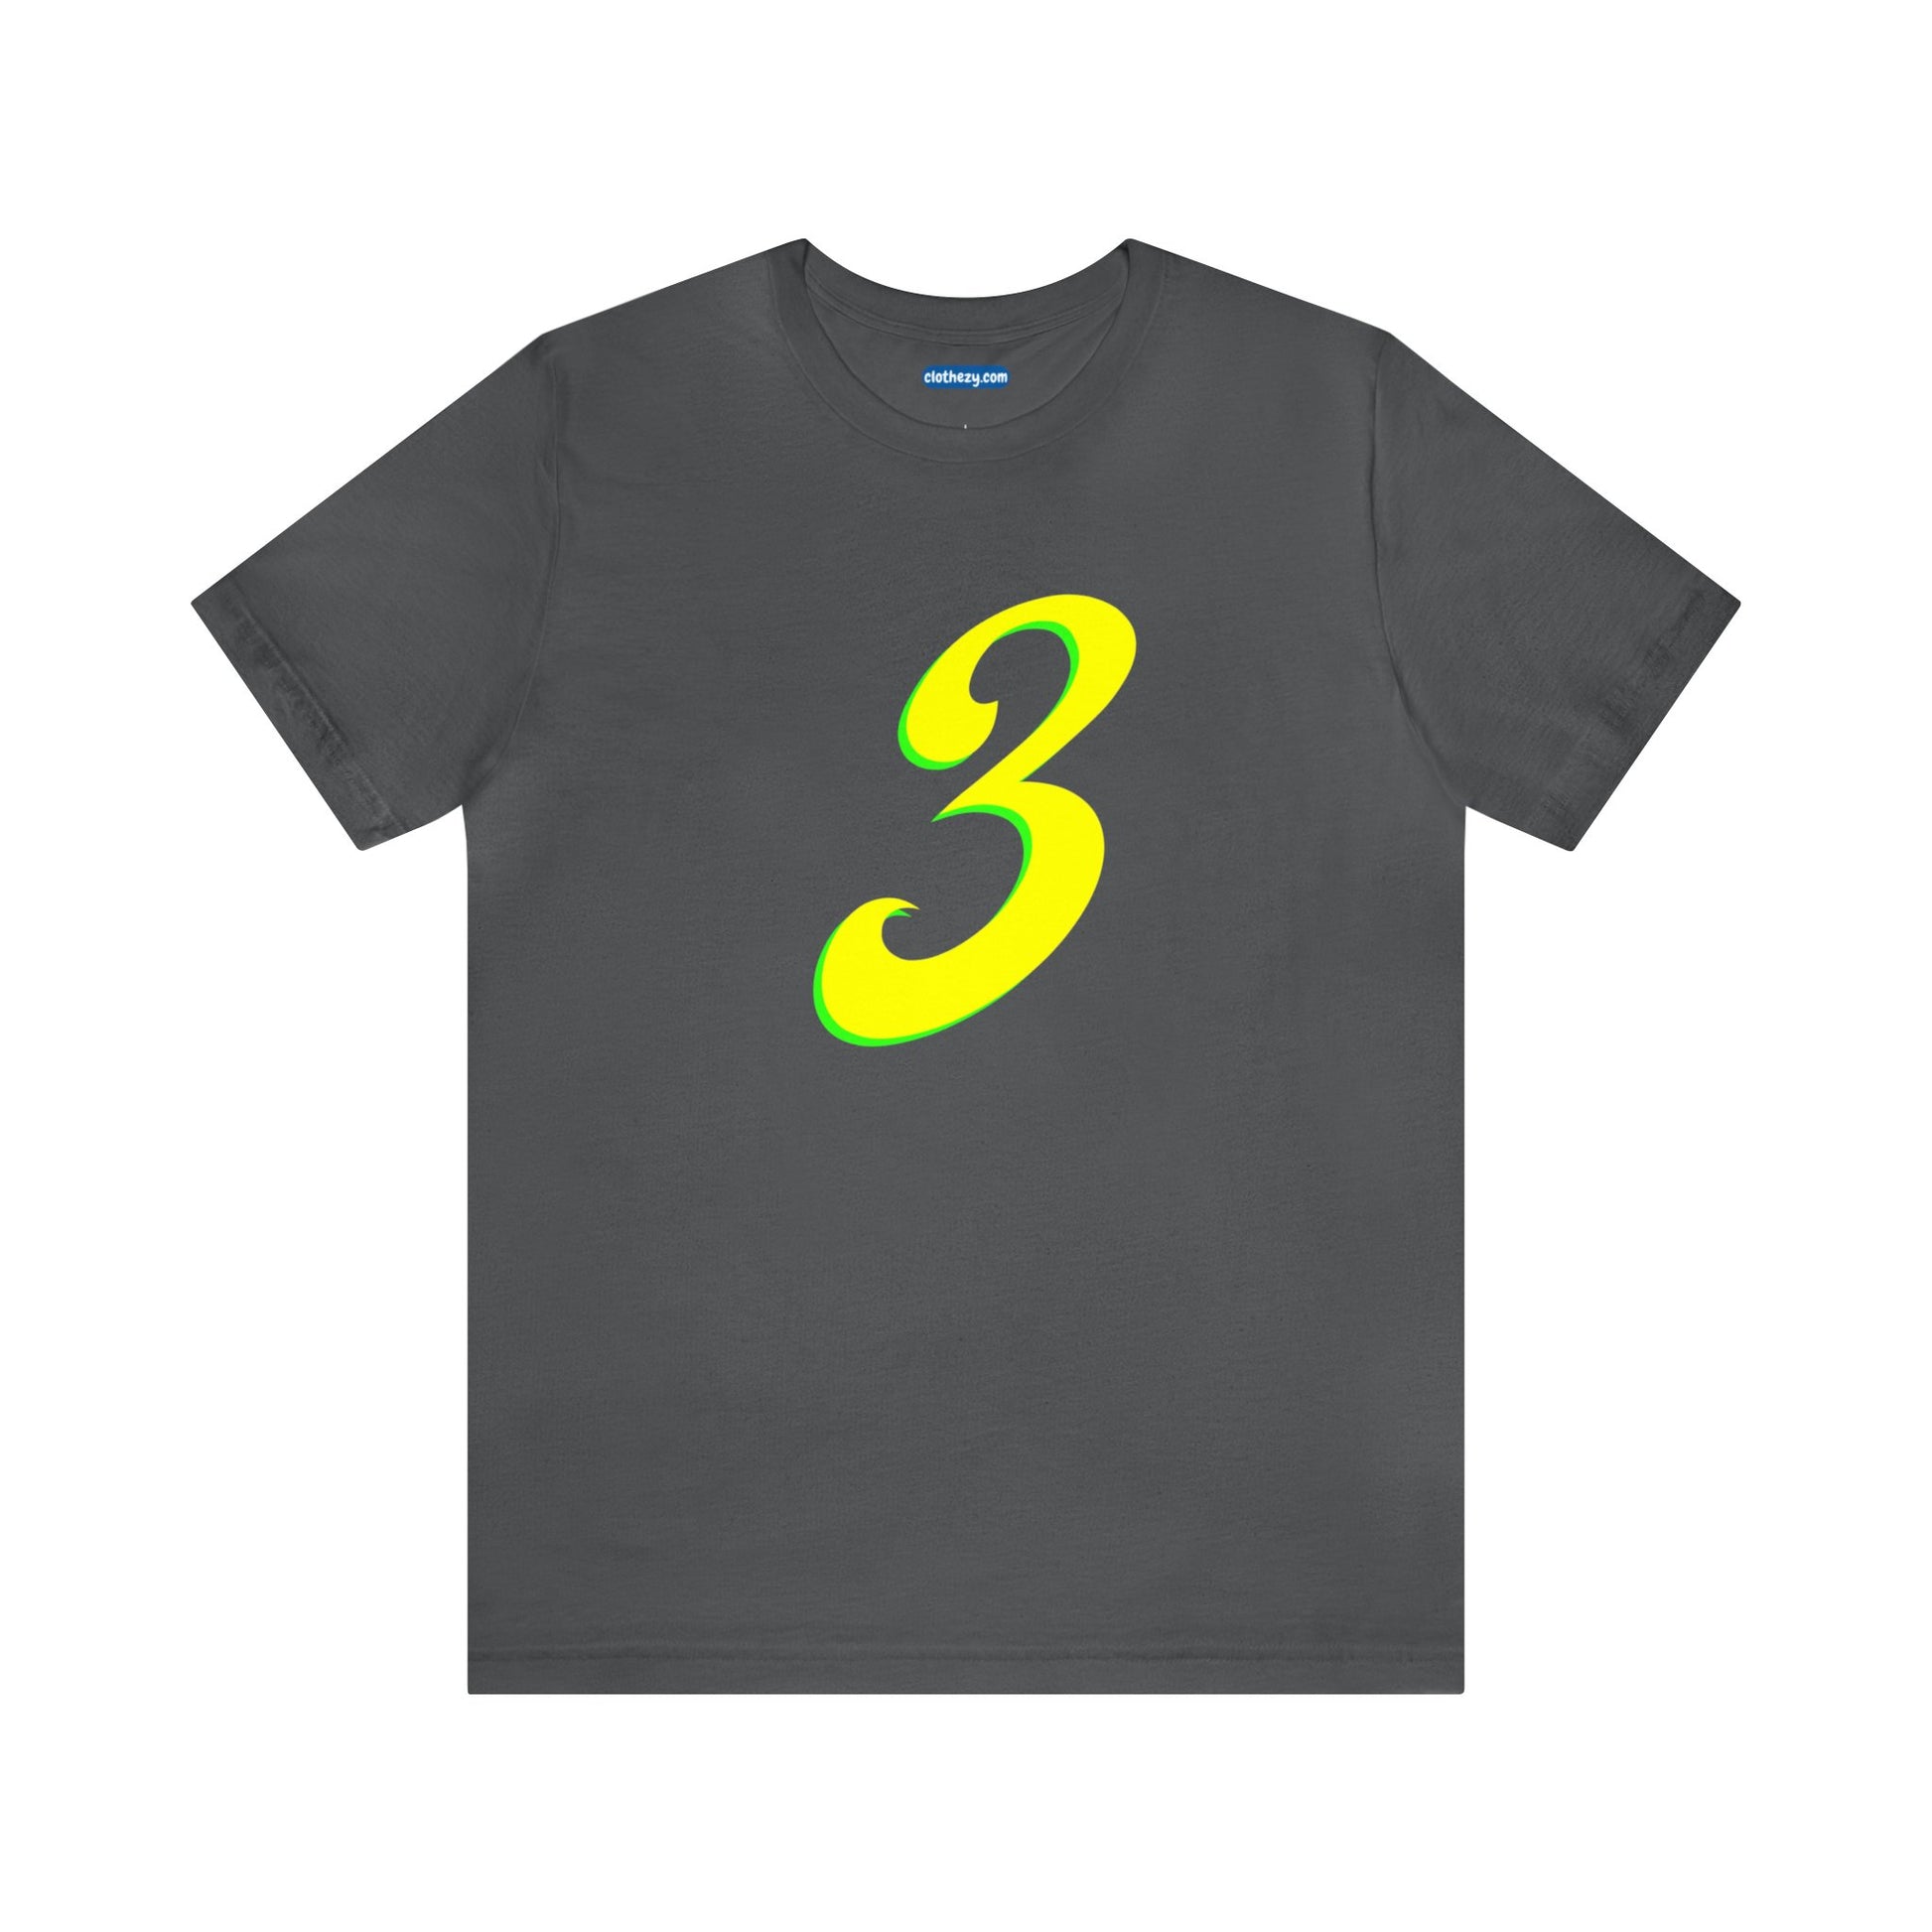 Number 3 Design - Soft Cotton Tee for birthdays and celebrations, Gift for friends and family, Multiple Options by clothezy.com in Black Size Small - Buy Now